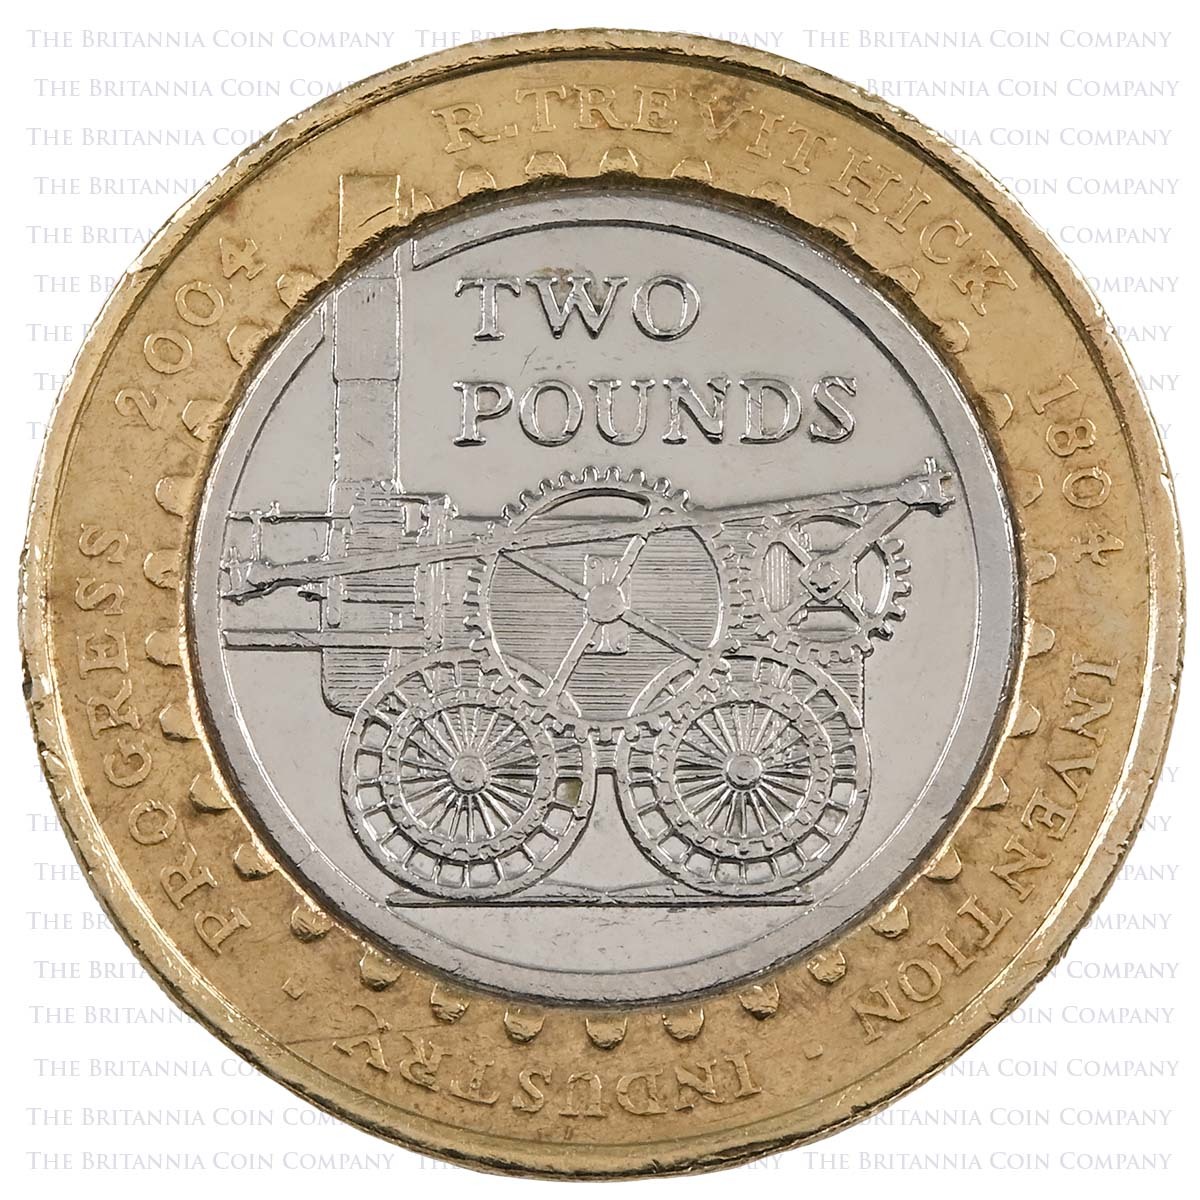 2004 Richard Trevithick First Steam Train Locomotive Circulated Two Pound Coin Reverse